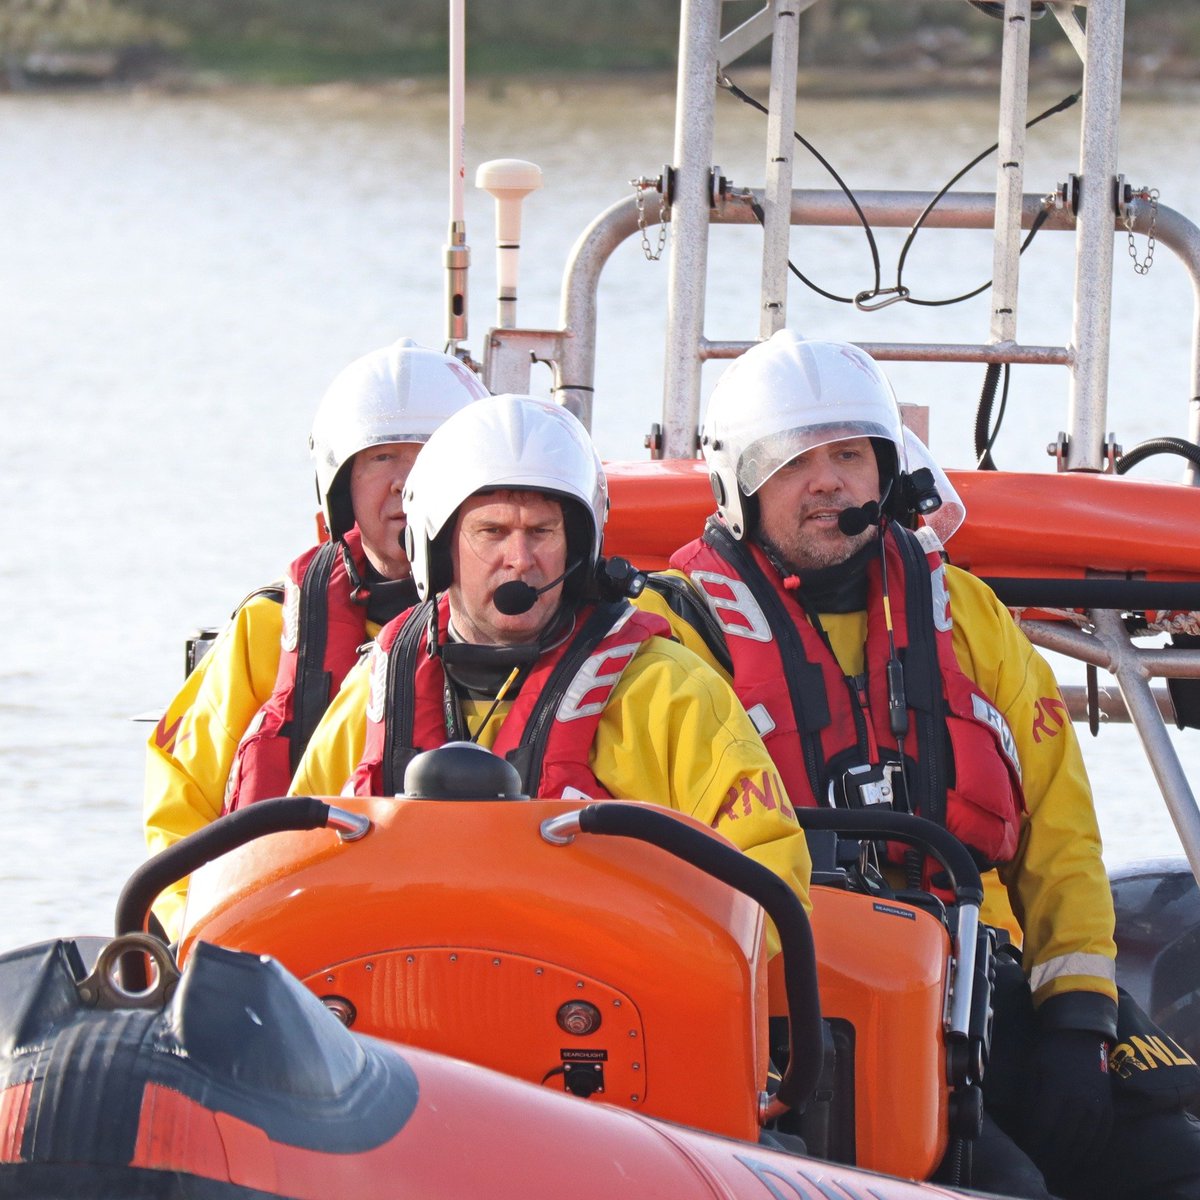 Hurry! There’s just over a week to go to get your bids in for our exciting online auction! There’s some amazing lots up for grabs - and the money raised will help the volunteer crew of Littlehampton RNLI continue to save lives at sea. Find out more: rb.gy/fxm09l